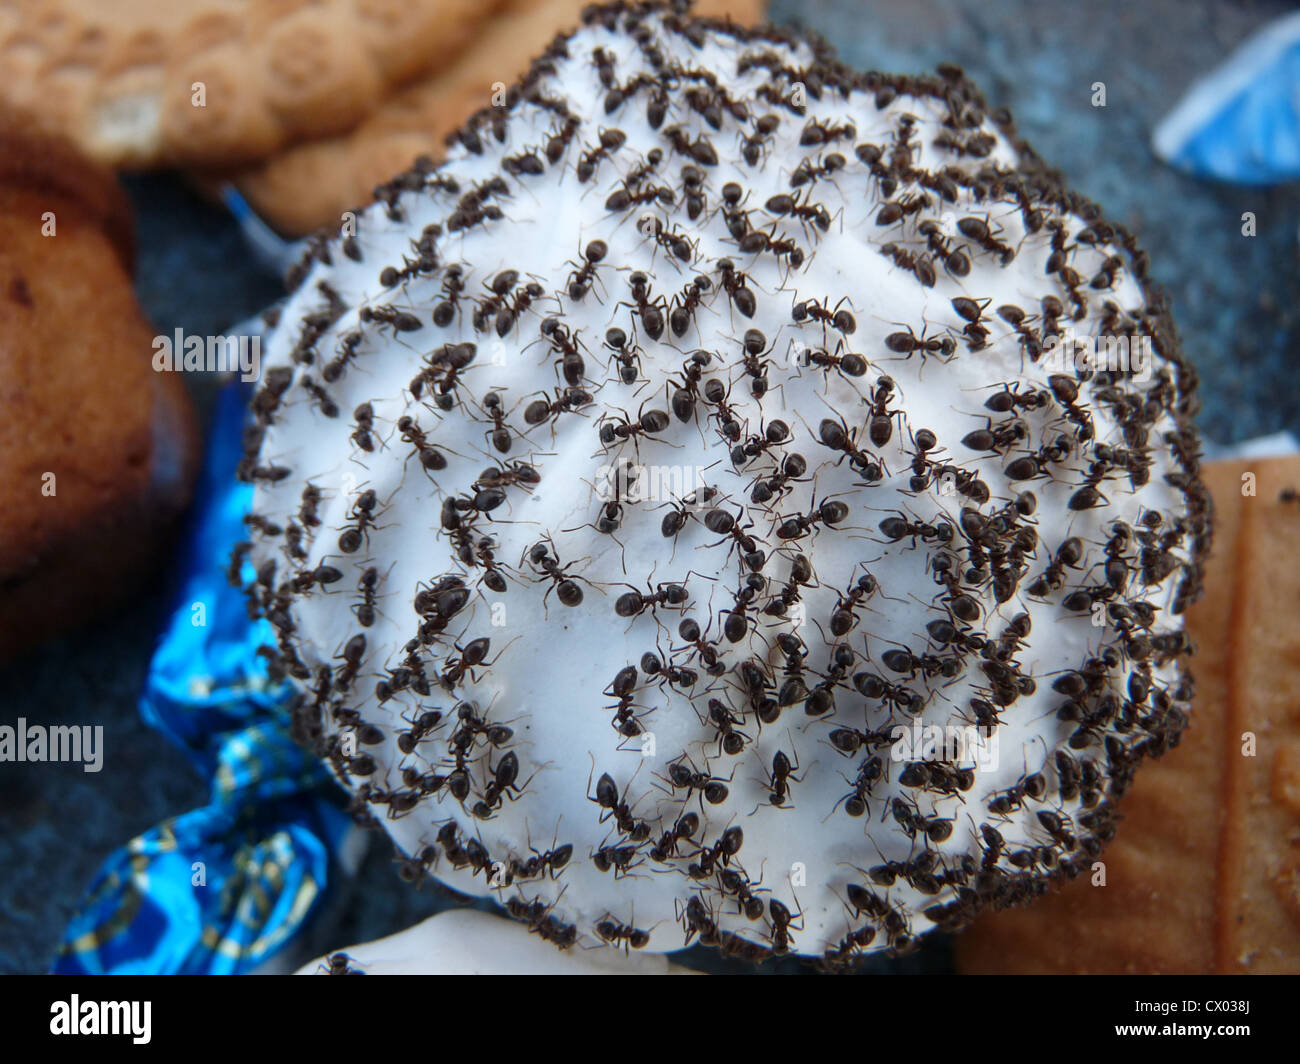 zephyr,food,ant,insects, confection,food and drink, funny, humor, tasty, sweet, animals, insects, flora and fauna, Stock Photo